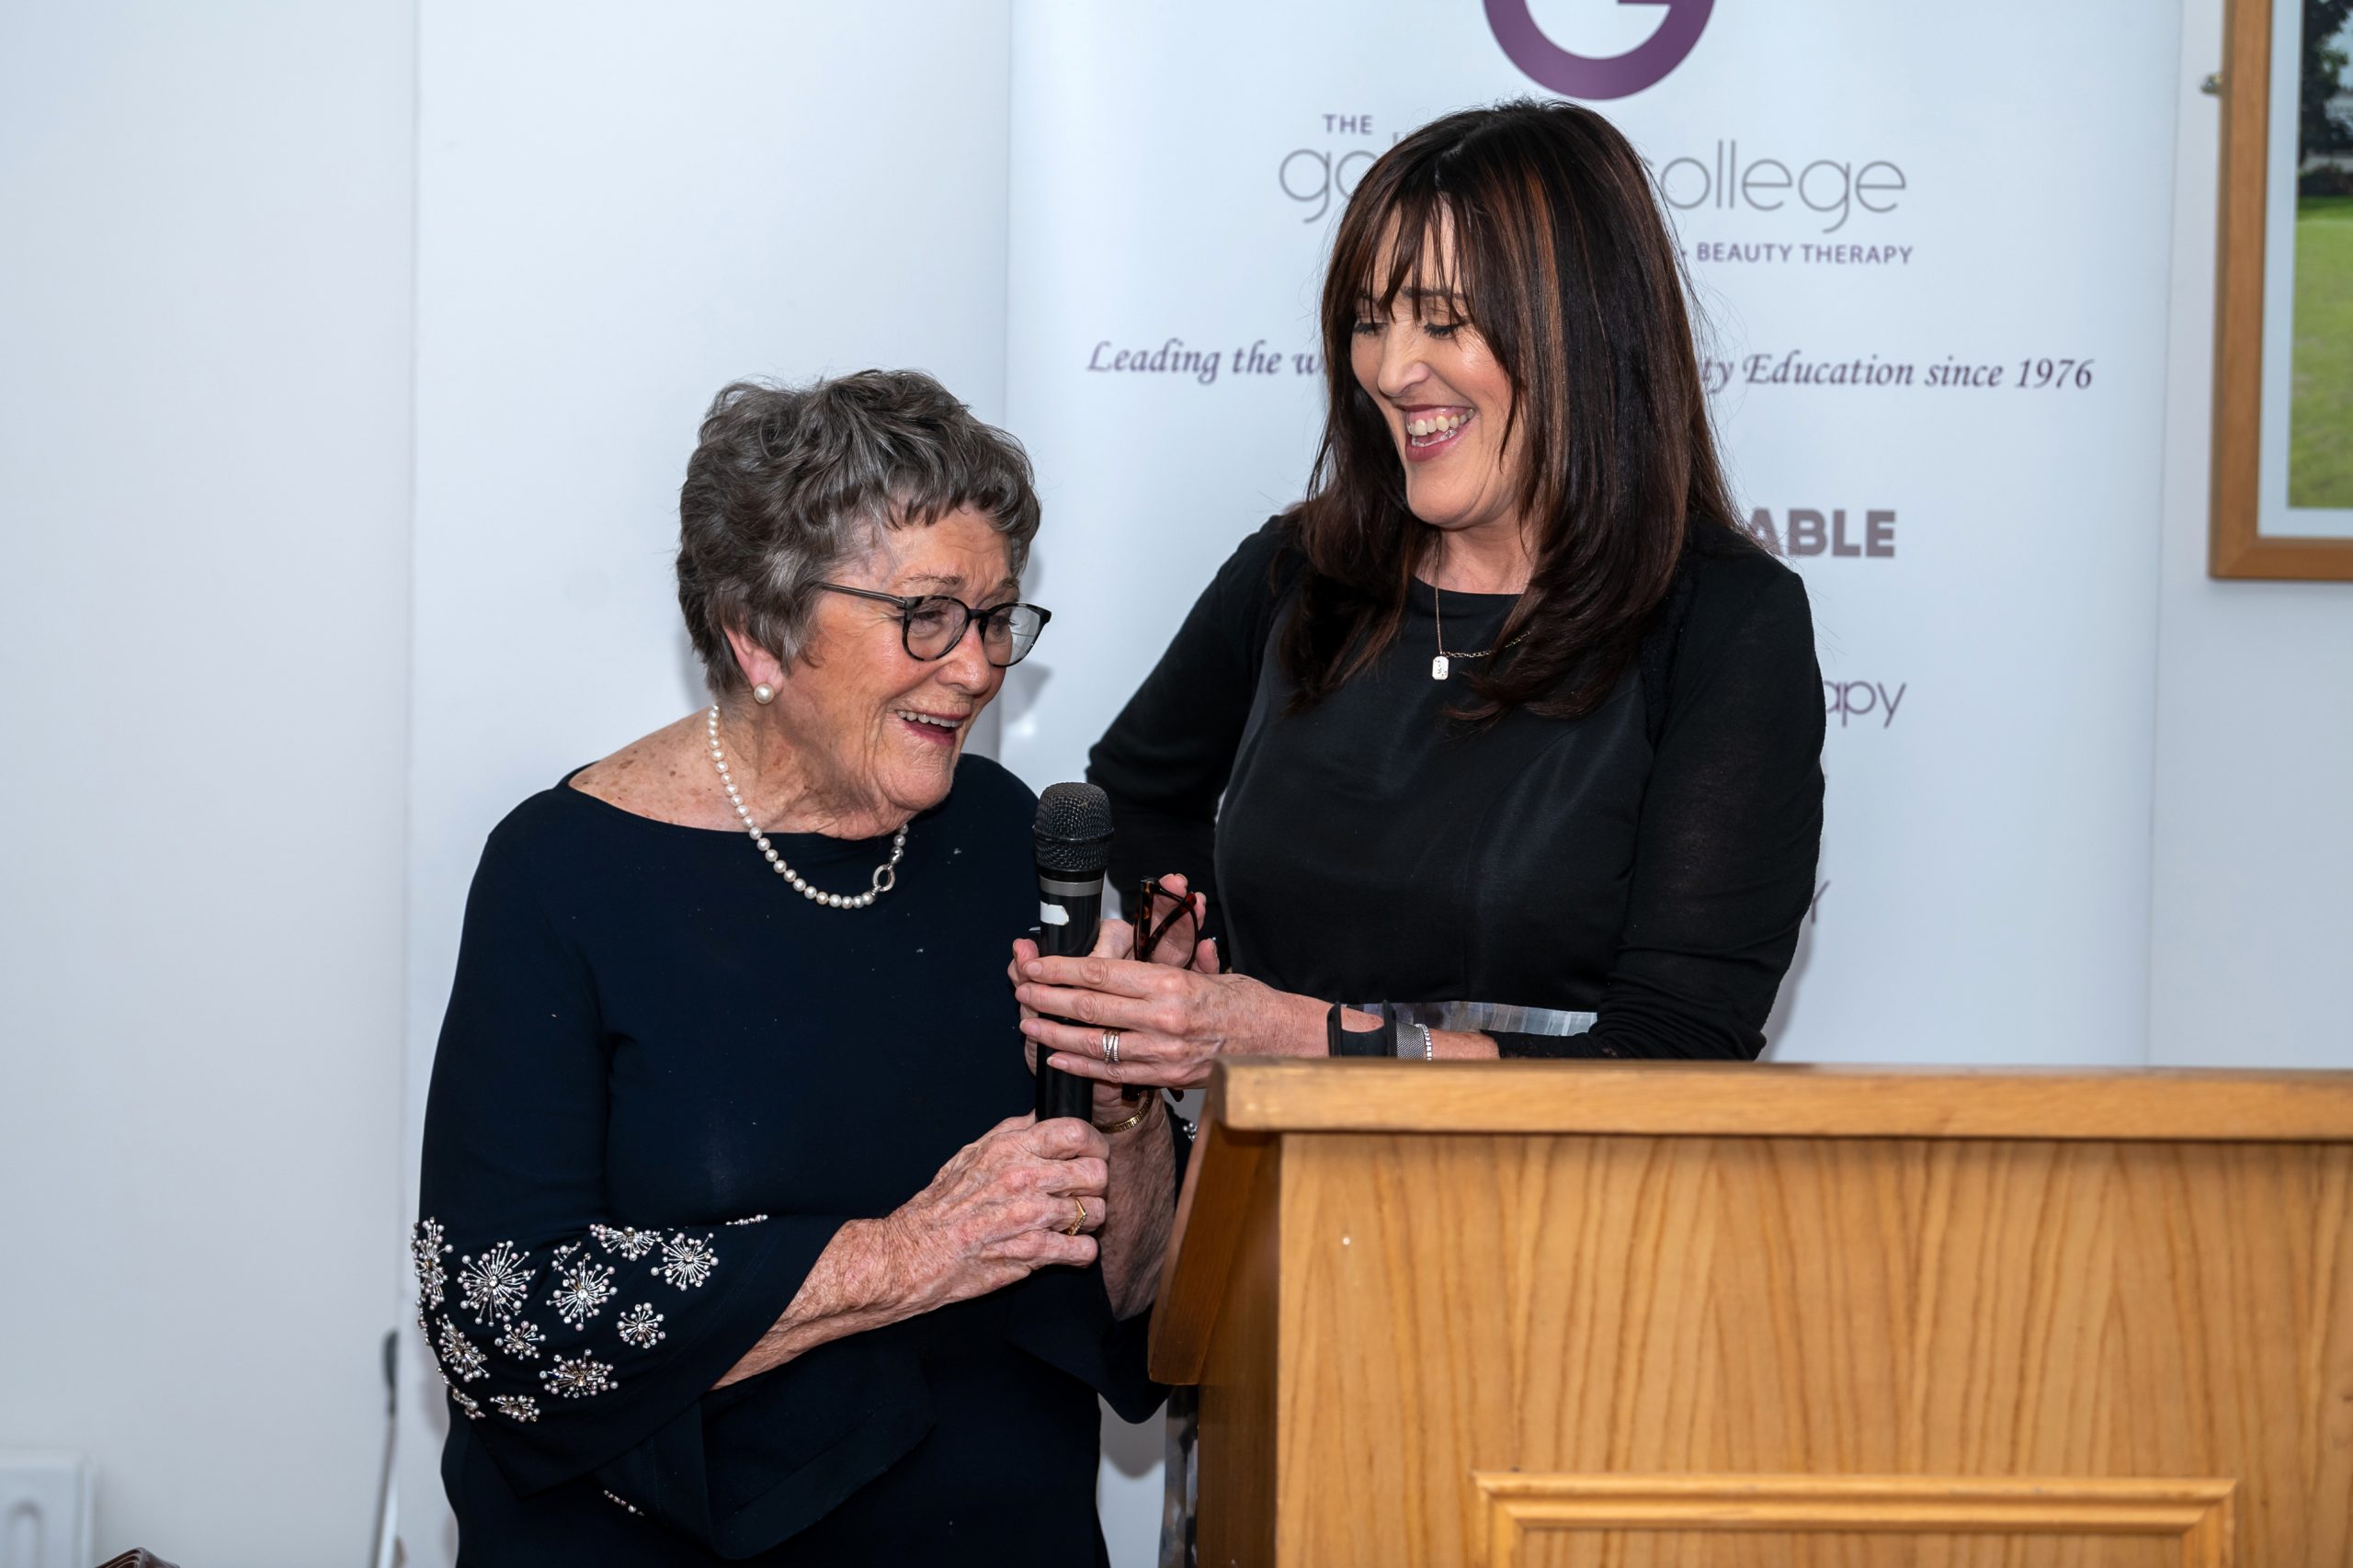 Image of Kay and Lorraine Galligan making a speech